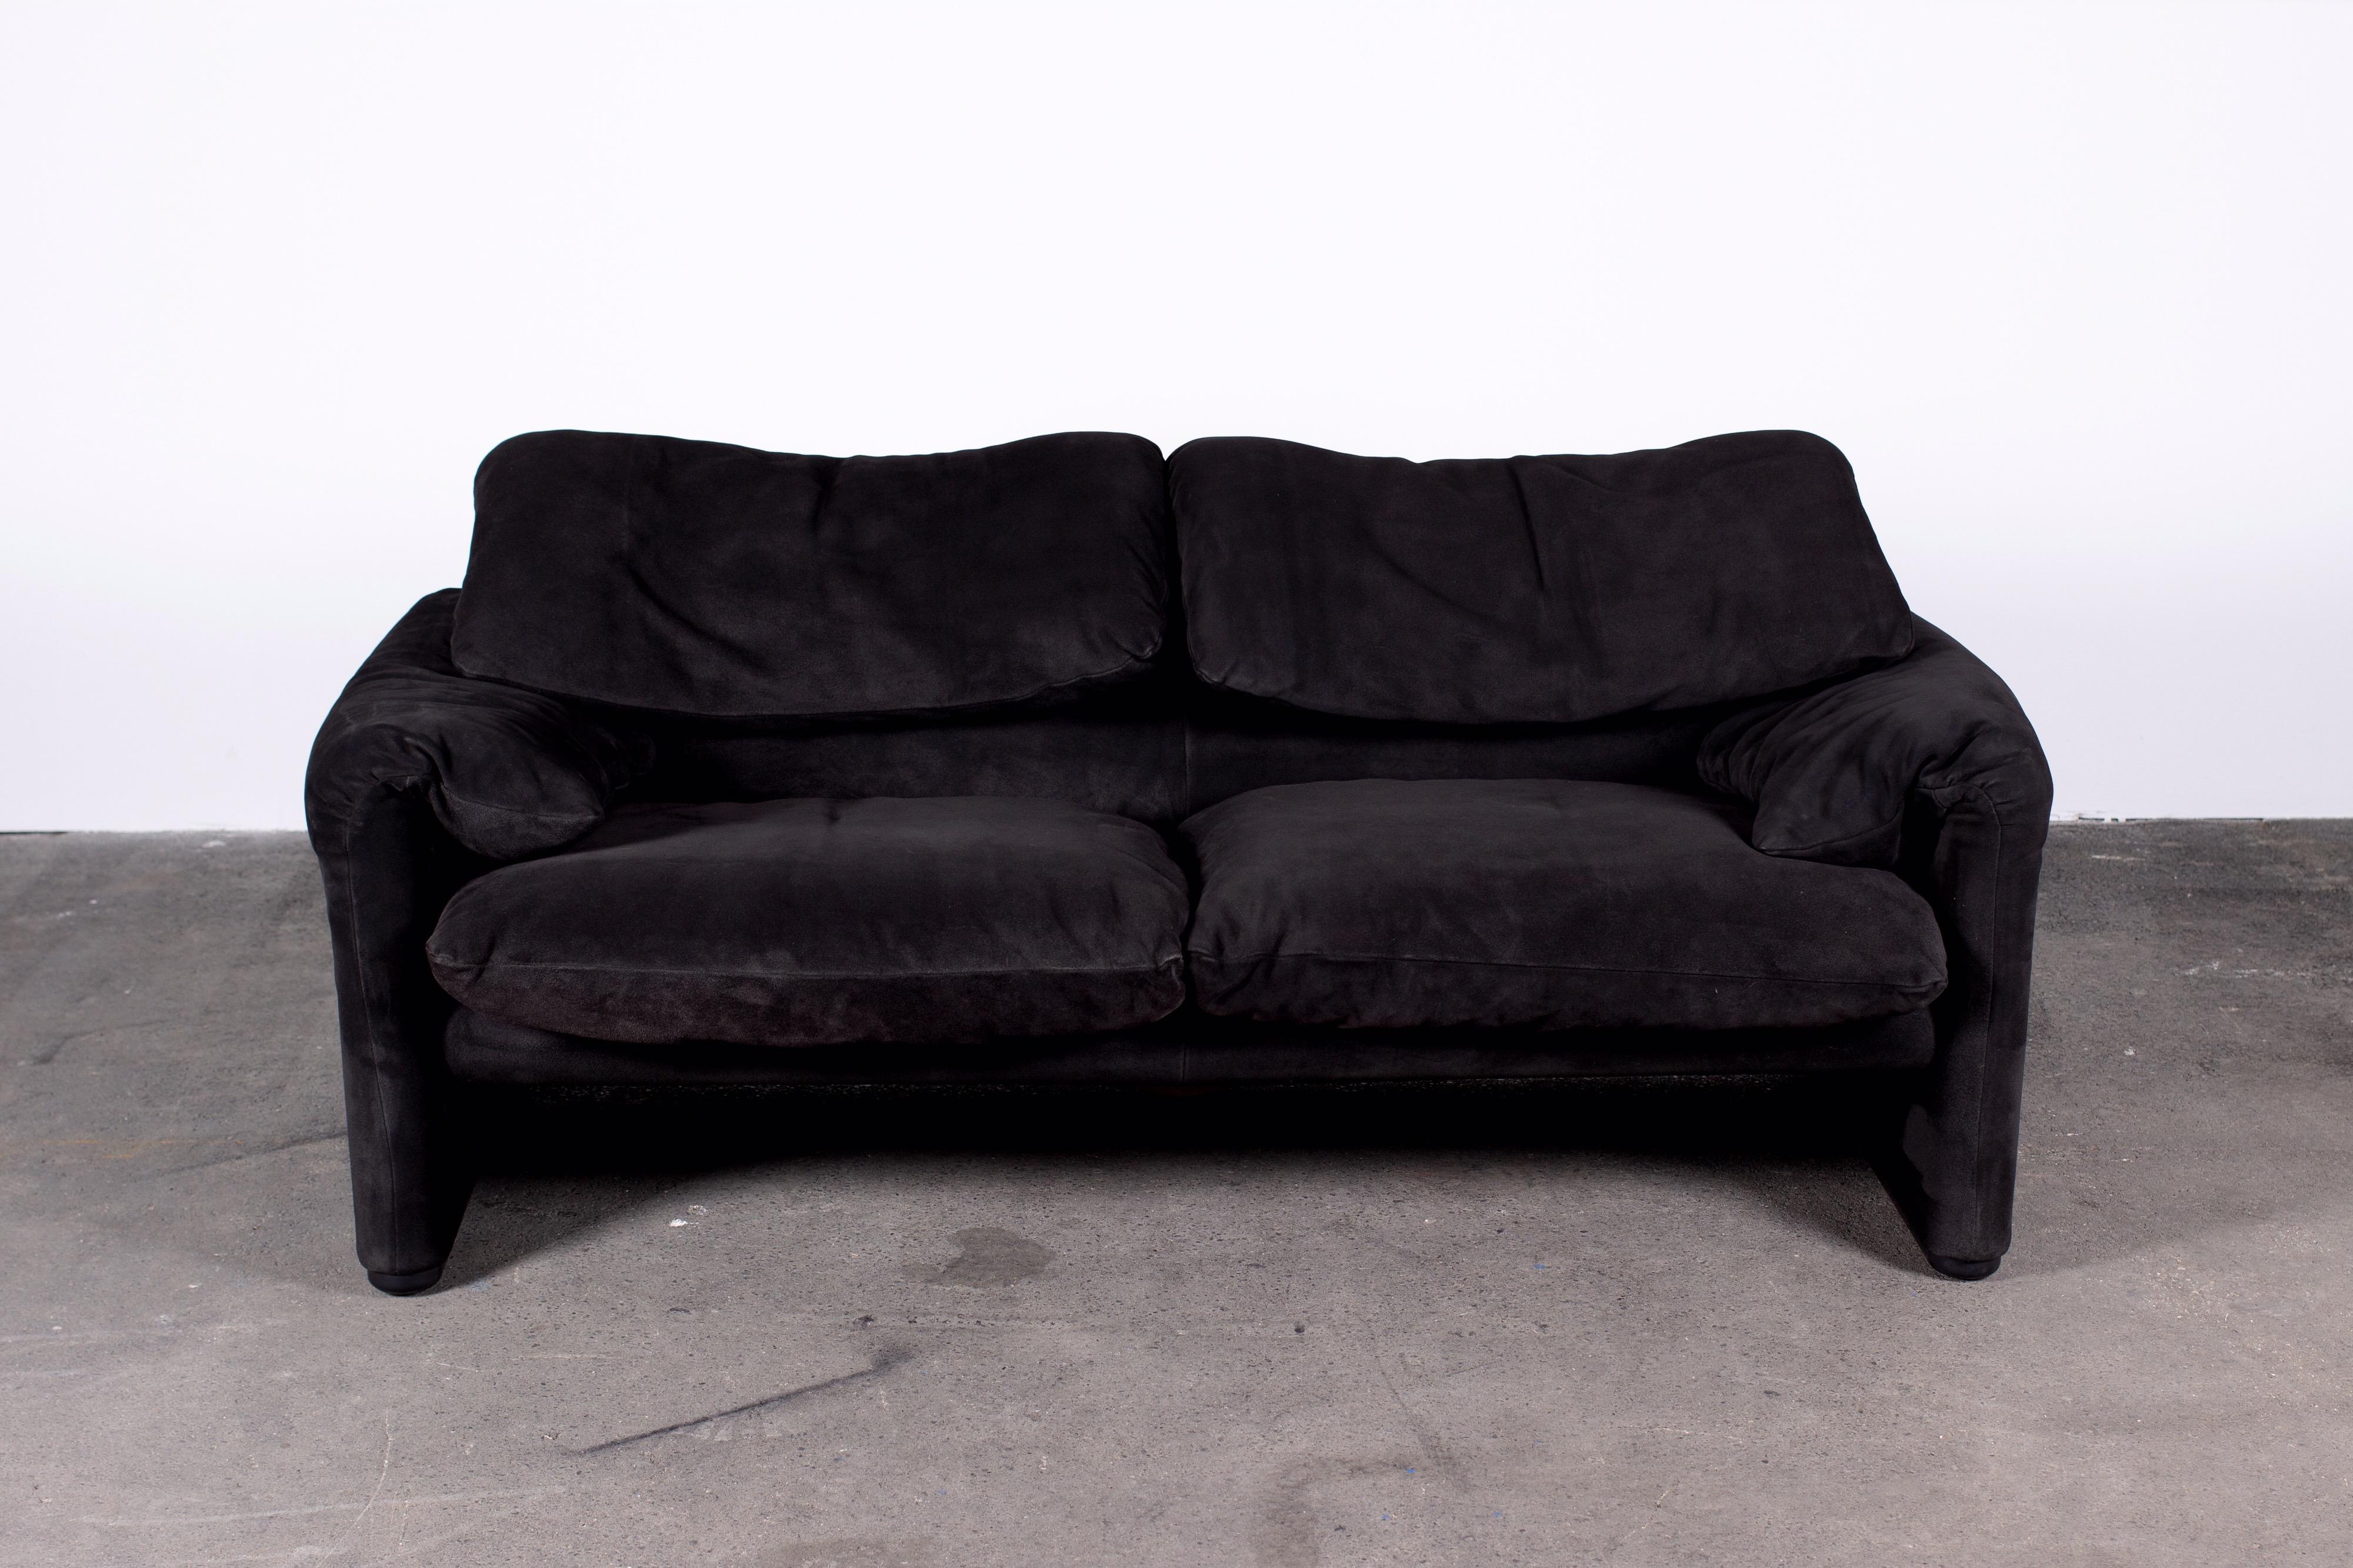 Pair of Black Suede 2-Seater Maralunga Sofas by Vico Magistretti for Cassina 6